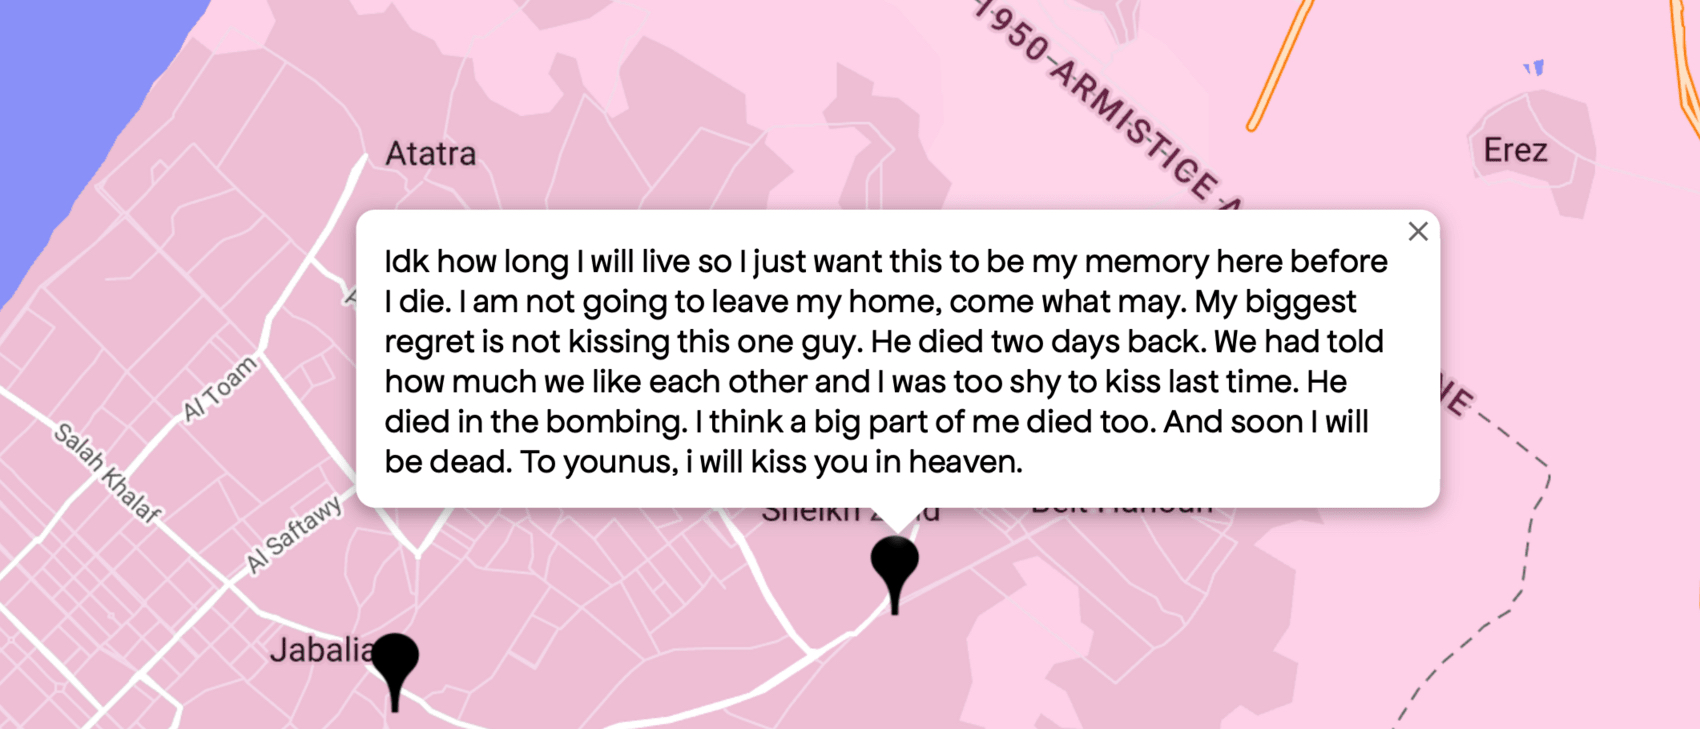 Screenshot from Queering the Map showing a pink map of a portion of Gaza. A black location marker has a quote from a queer Palestinian hovering above it, which says, “Idk how long I will live so I just want this to be my memory here before I die. I am not going to leave my home, come what may. My biggest regret is not kissing this one guy. He died two days back. We had told how much we liked each other and I was too shy to kiss last time. He died in the bombing. I think a big part of me died too. And soon I will be dead. To younus, I will kiss you in heaven.”